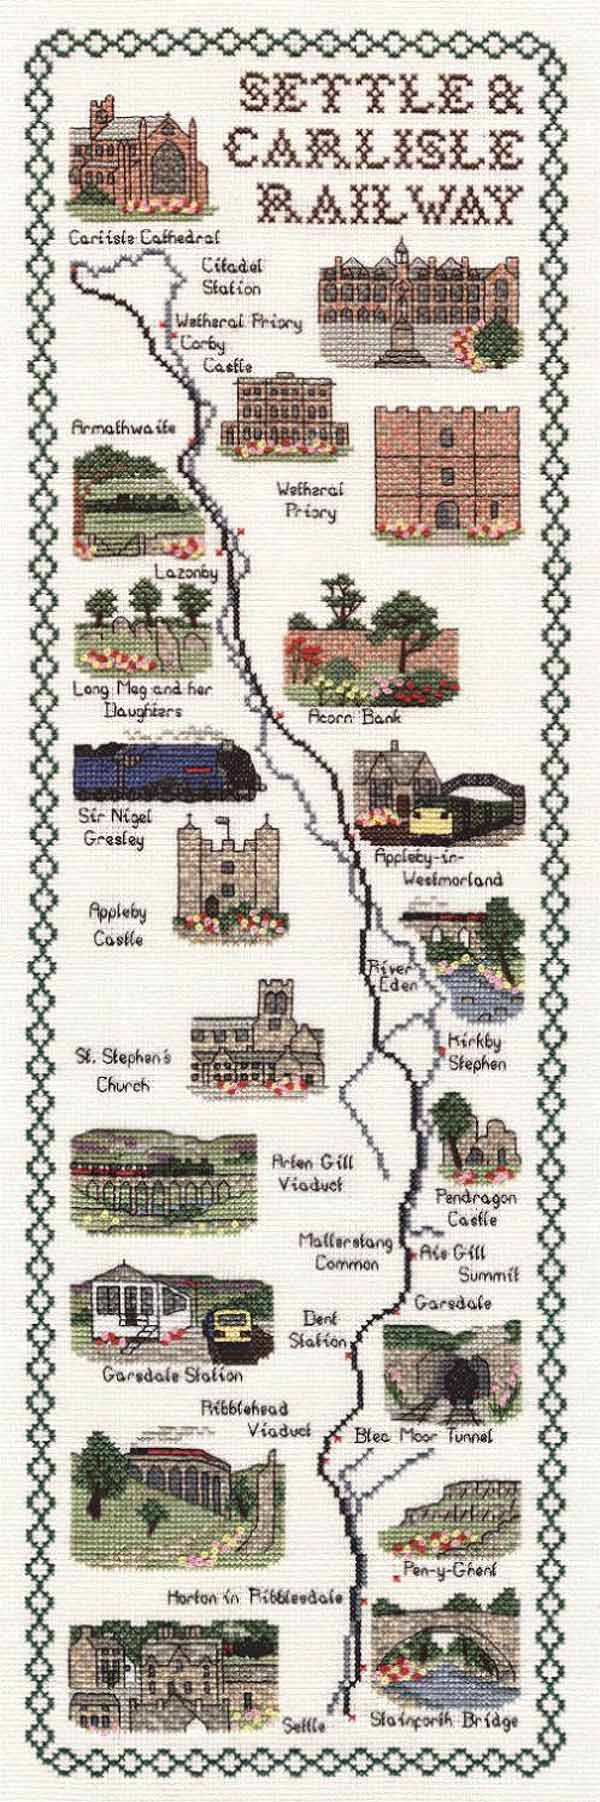 Settle and Carlisle Railway Map Cross Stitch Kit by Classic Embroidery